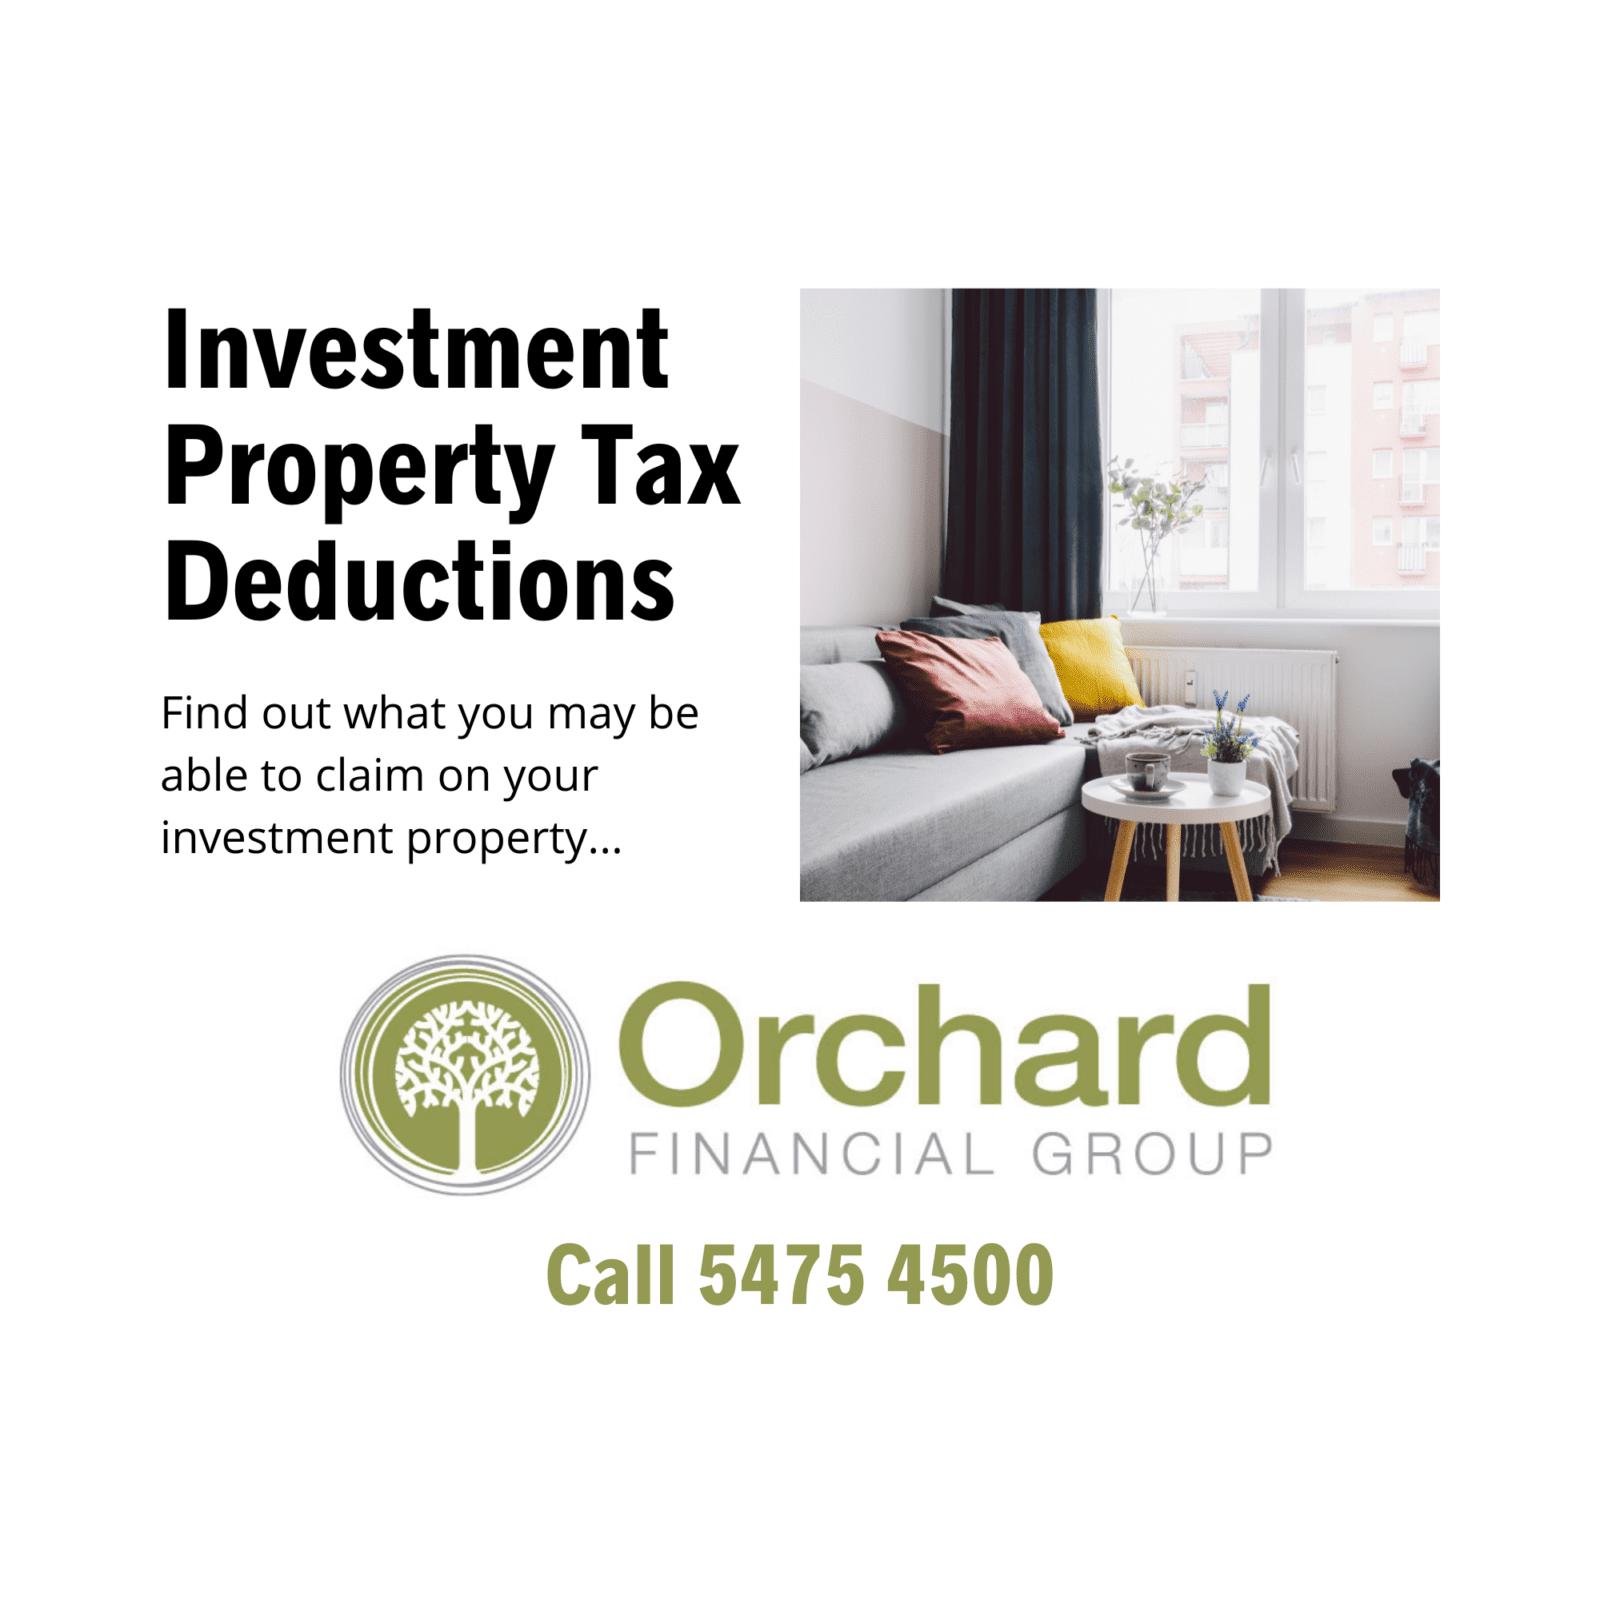 Investment Property Tax Deductions Australia | Orchard Mortgages | Sunshine Coast Mortgage Brokers | Mortgage Broker Near Me